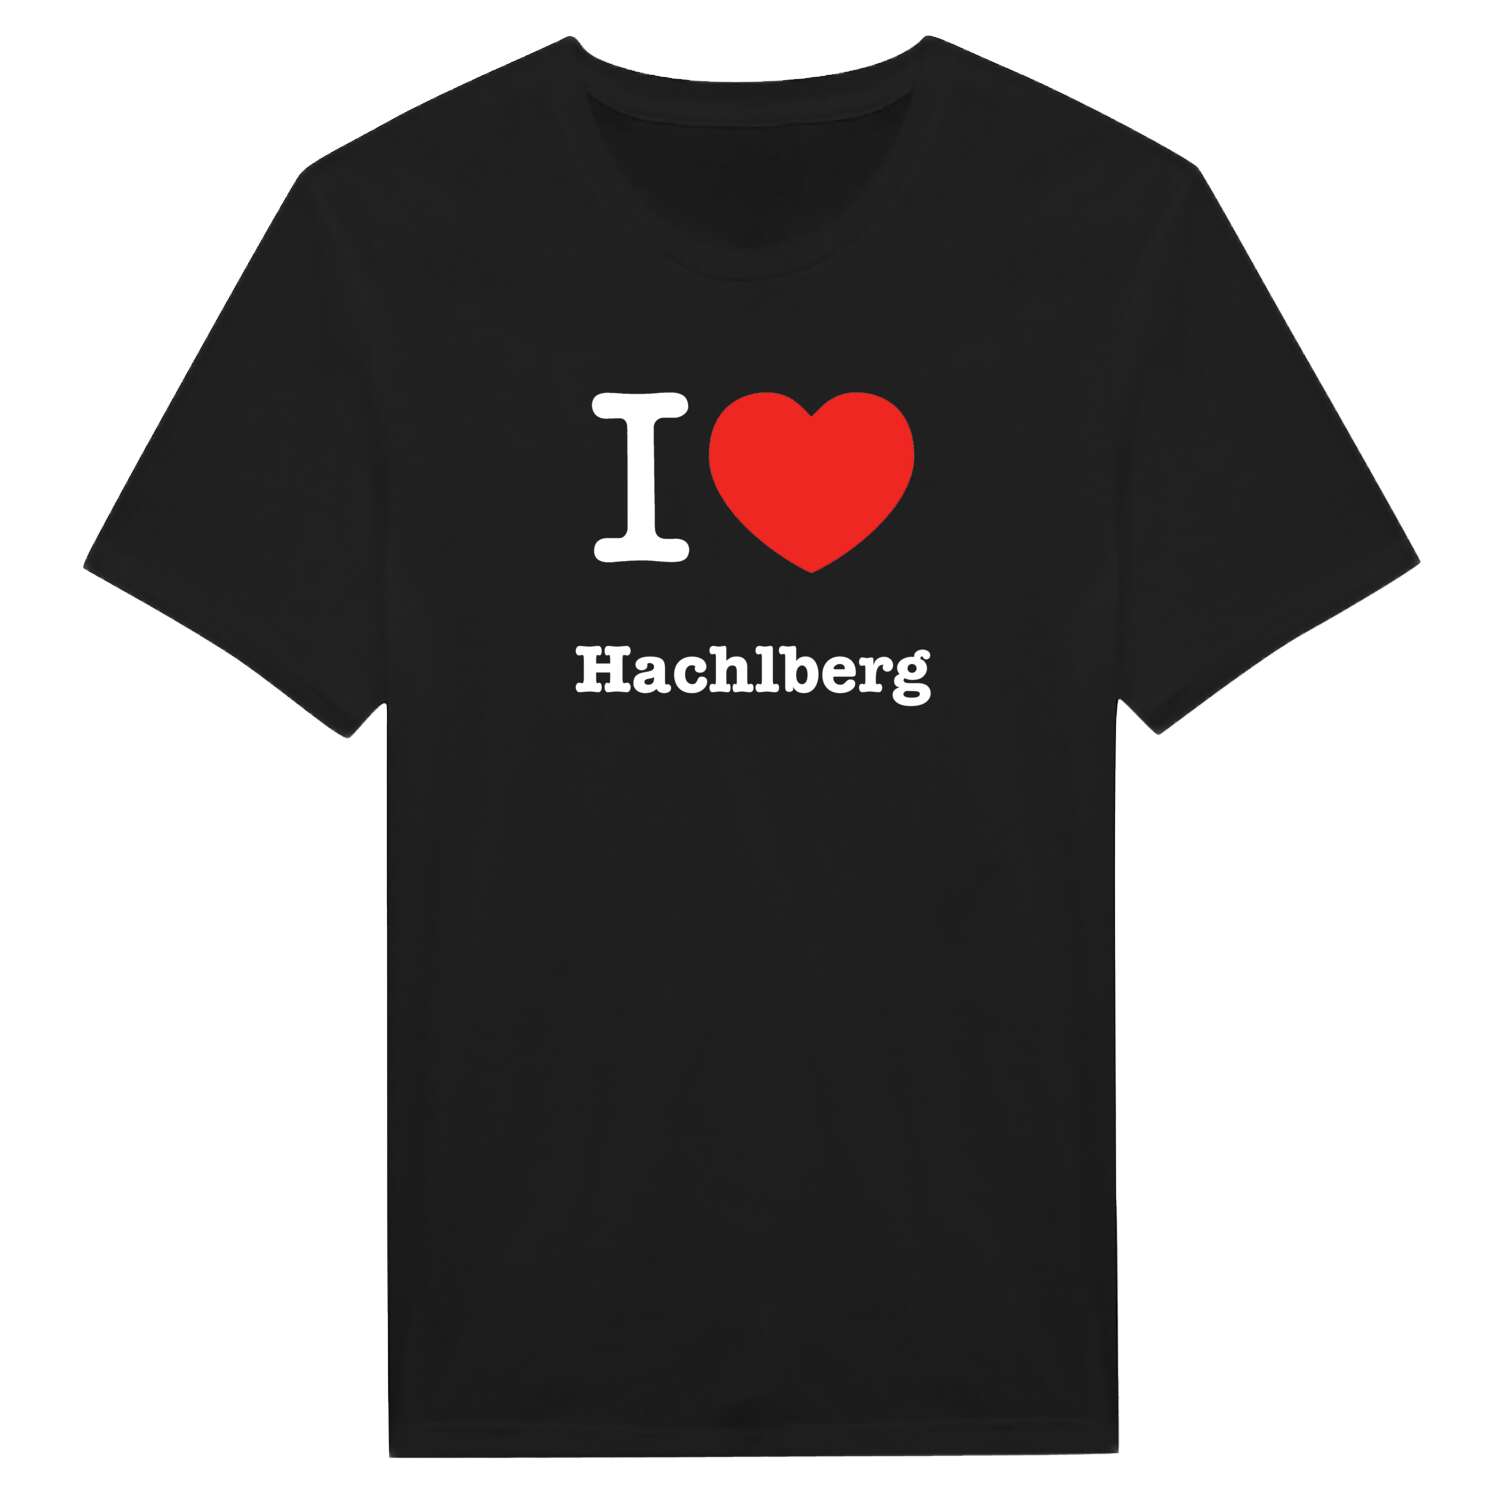 Hachlberg T-Shirt »I love«